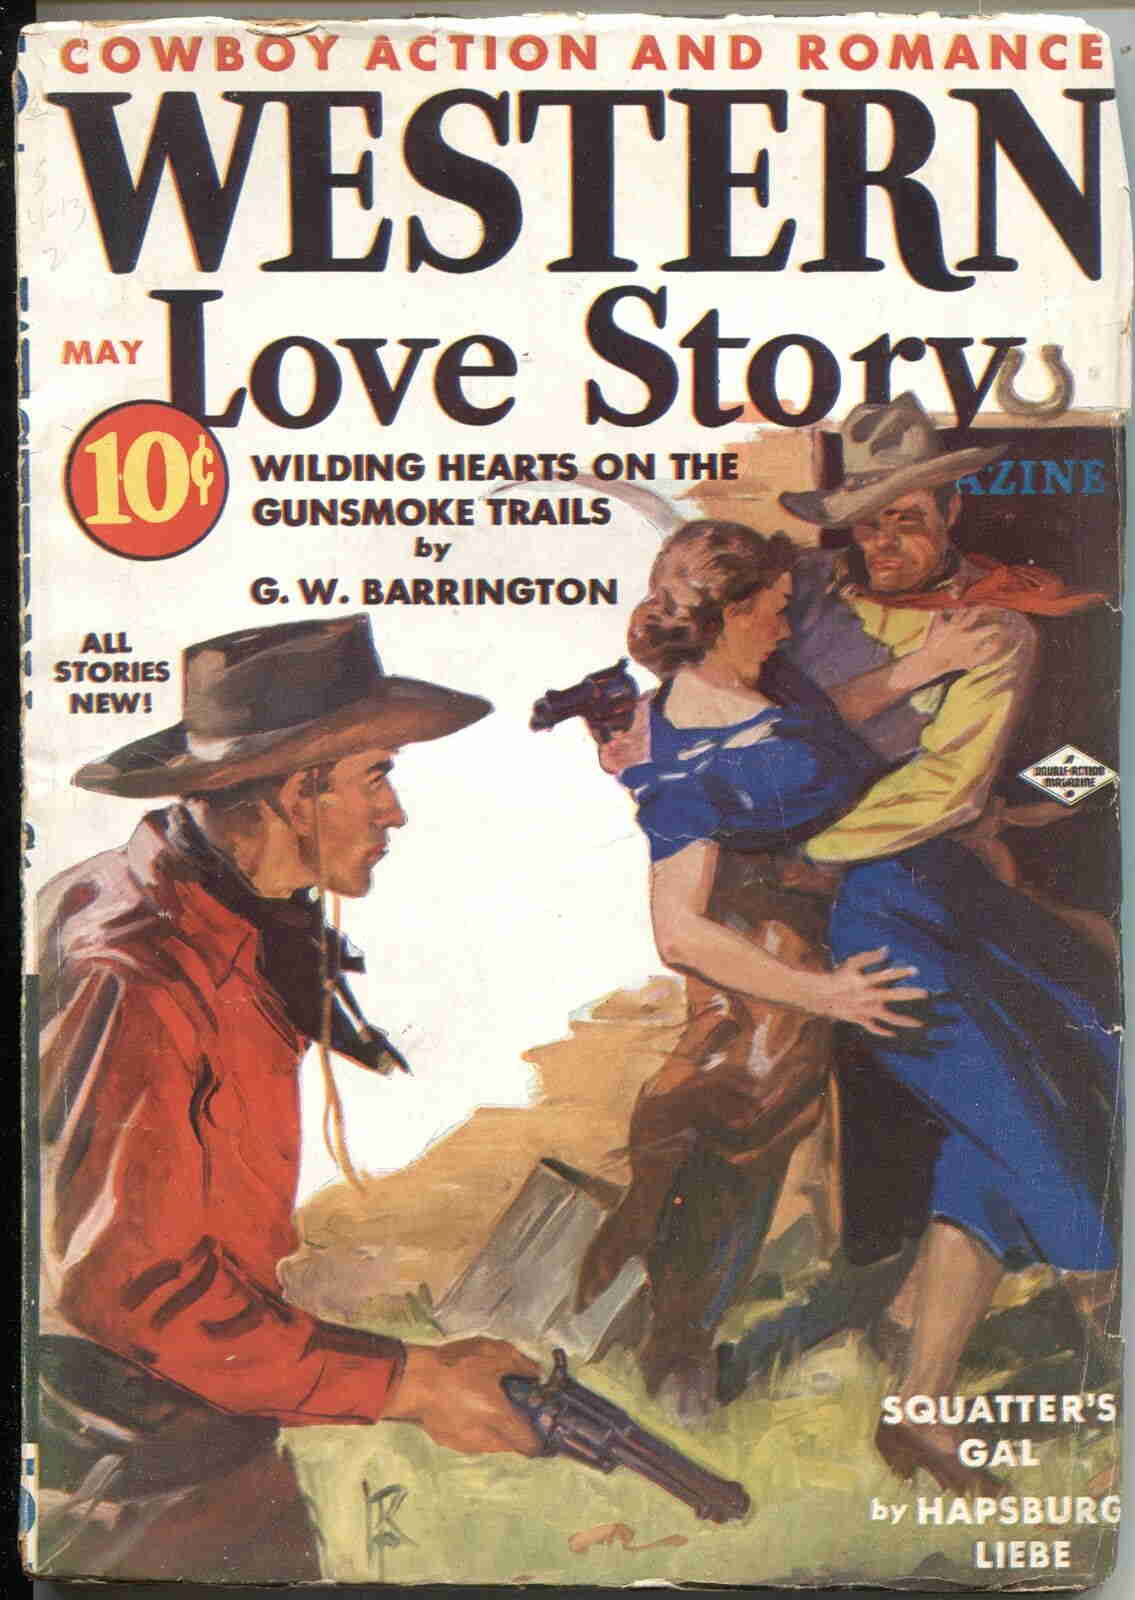 Western Love Story - May 1938